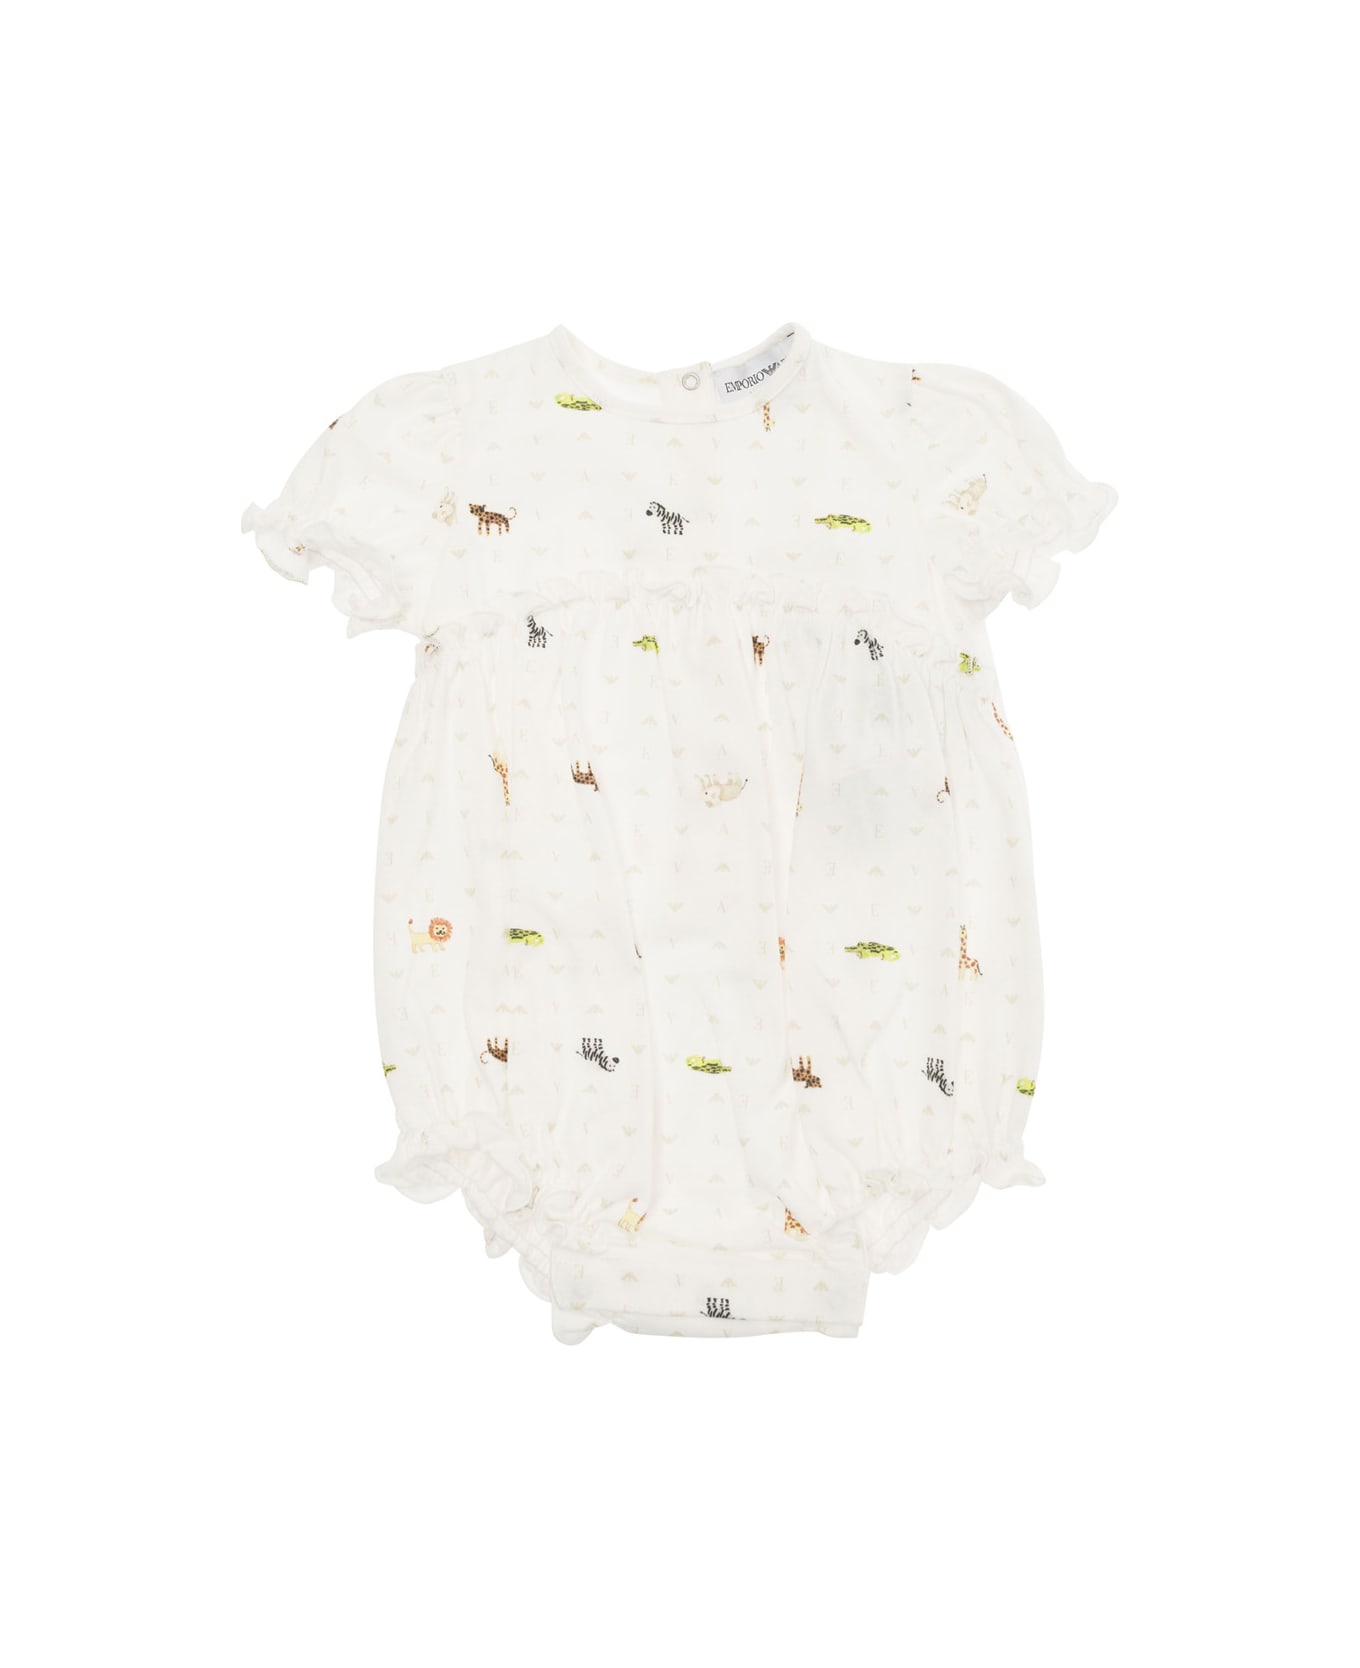 Emporio Armani White Set With Flounces And All-over Animals Print In Cotton Baby - White